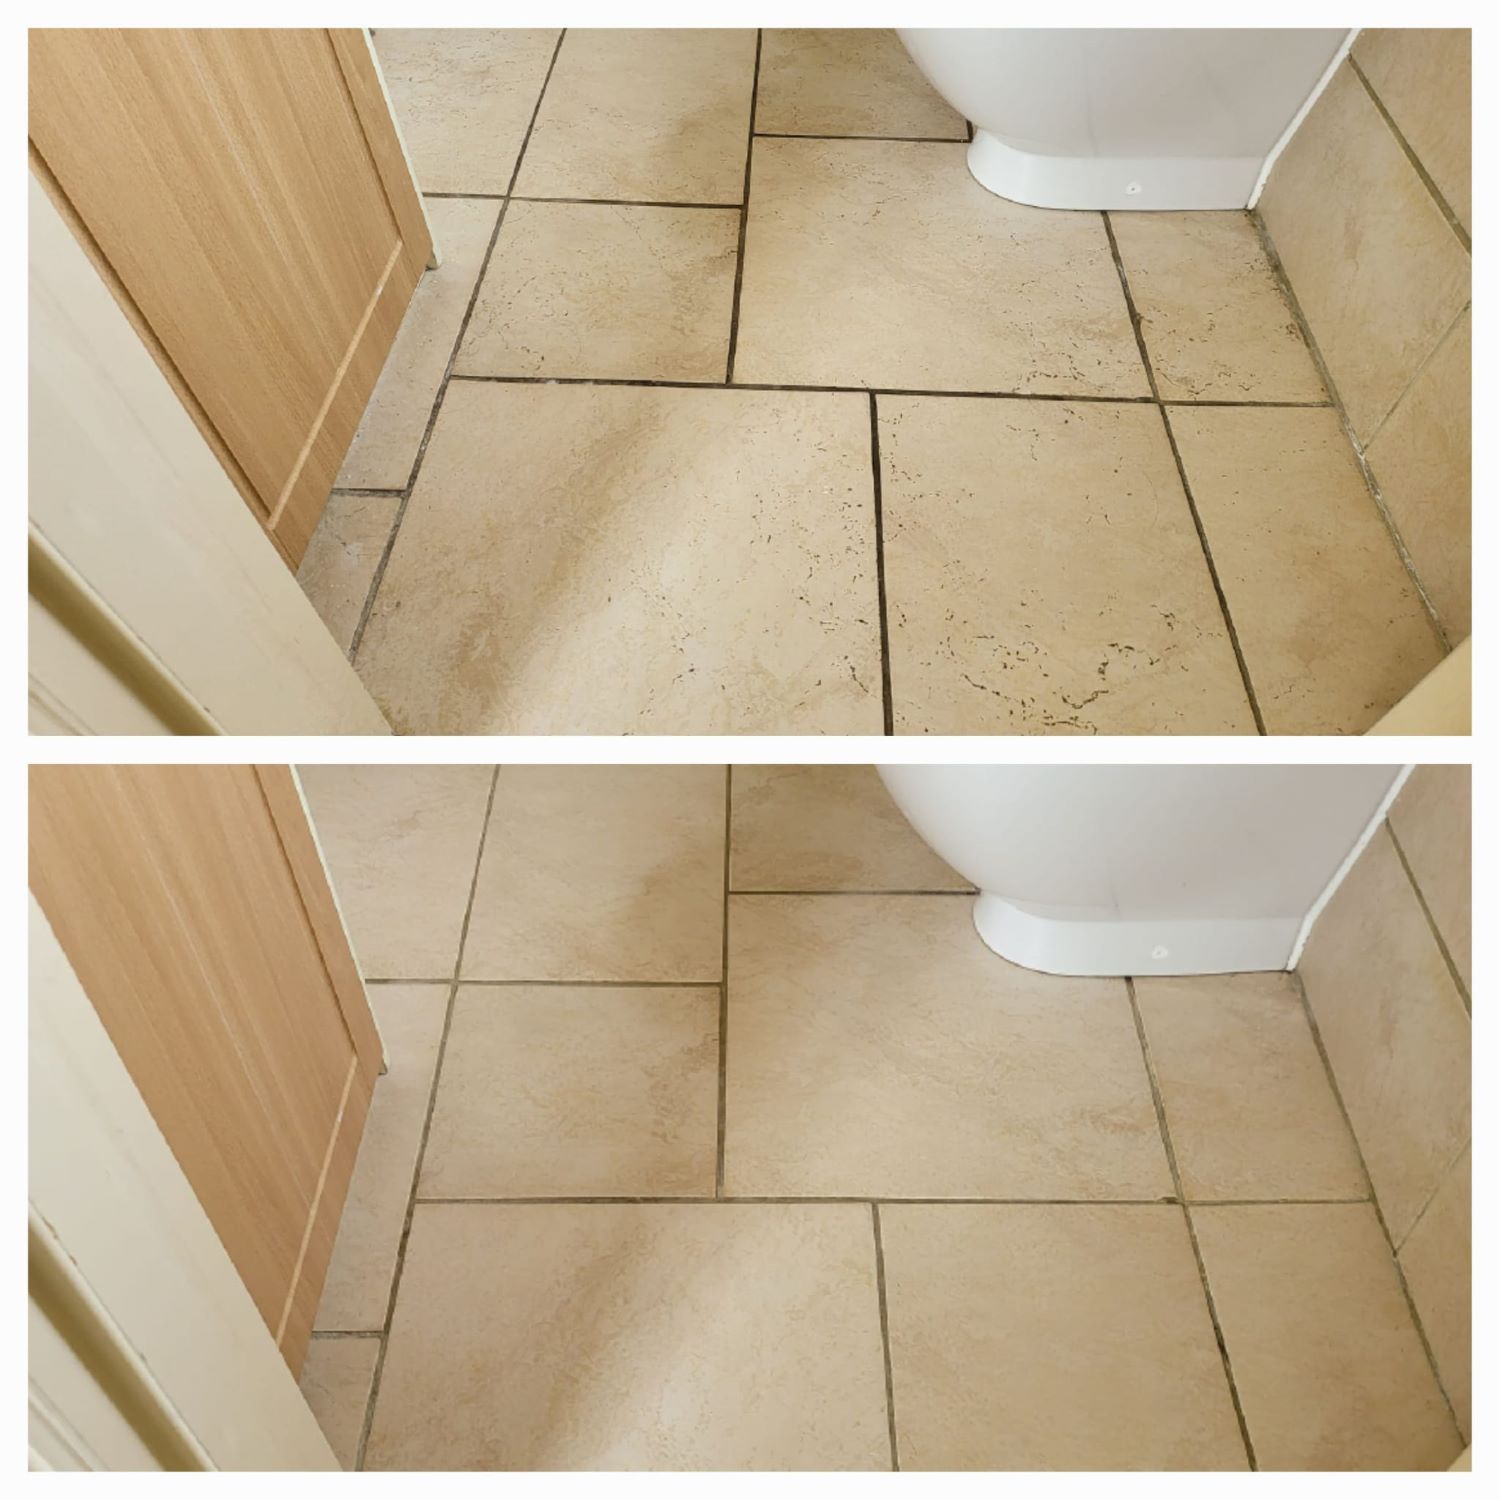 Floor cleaning in commercial toilets